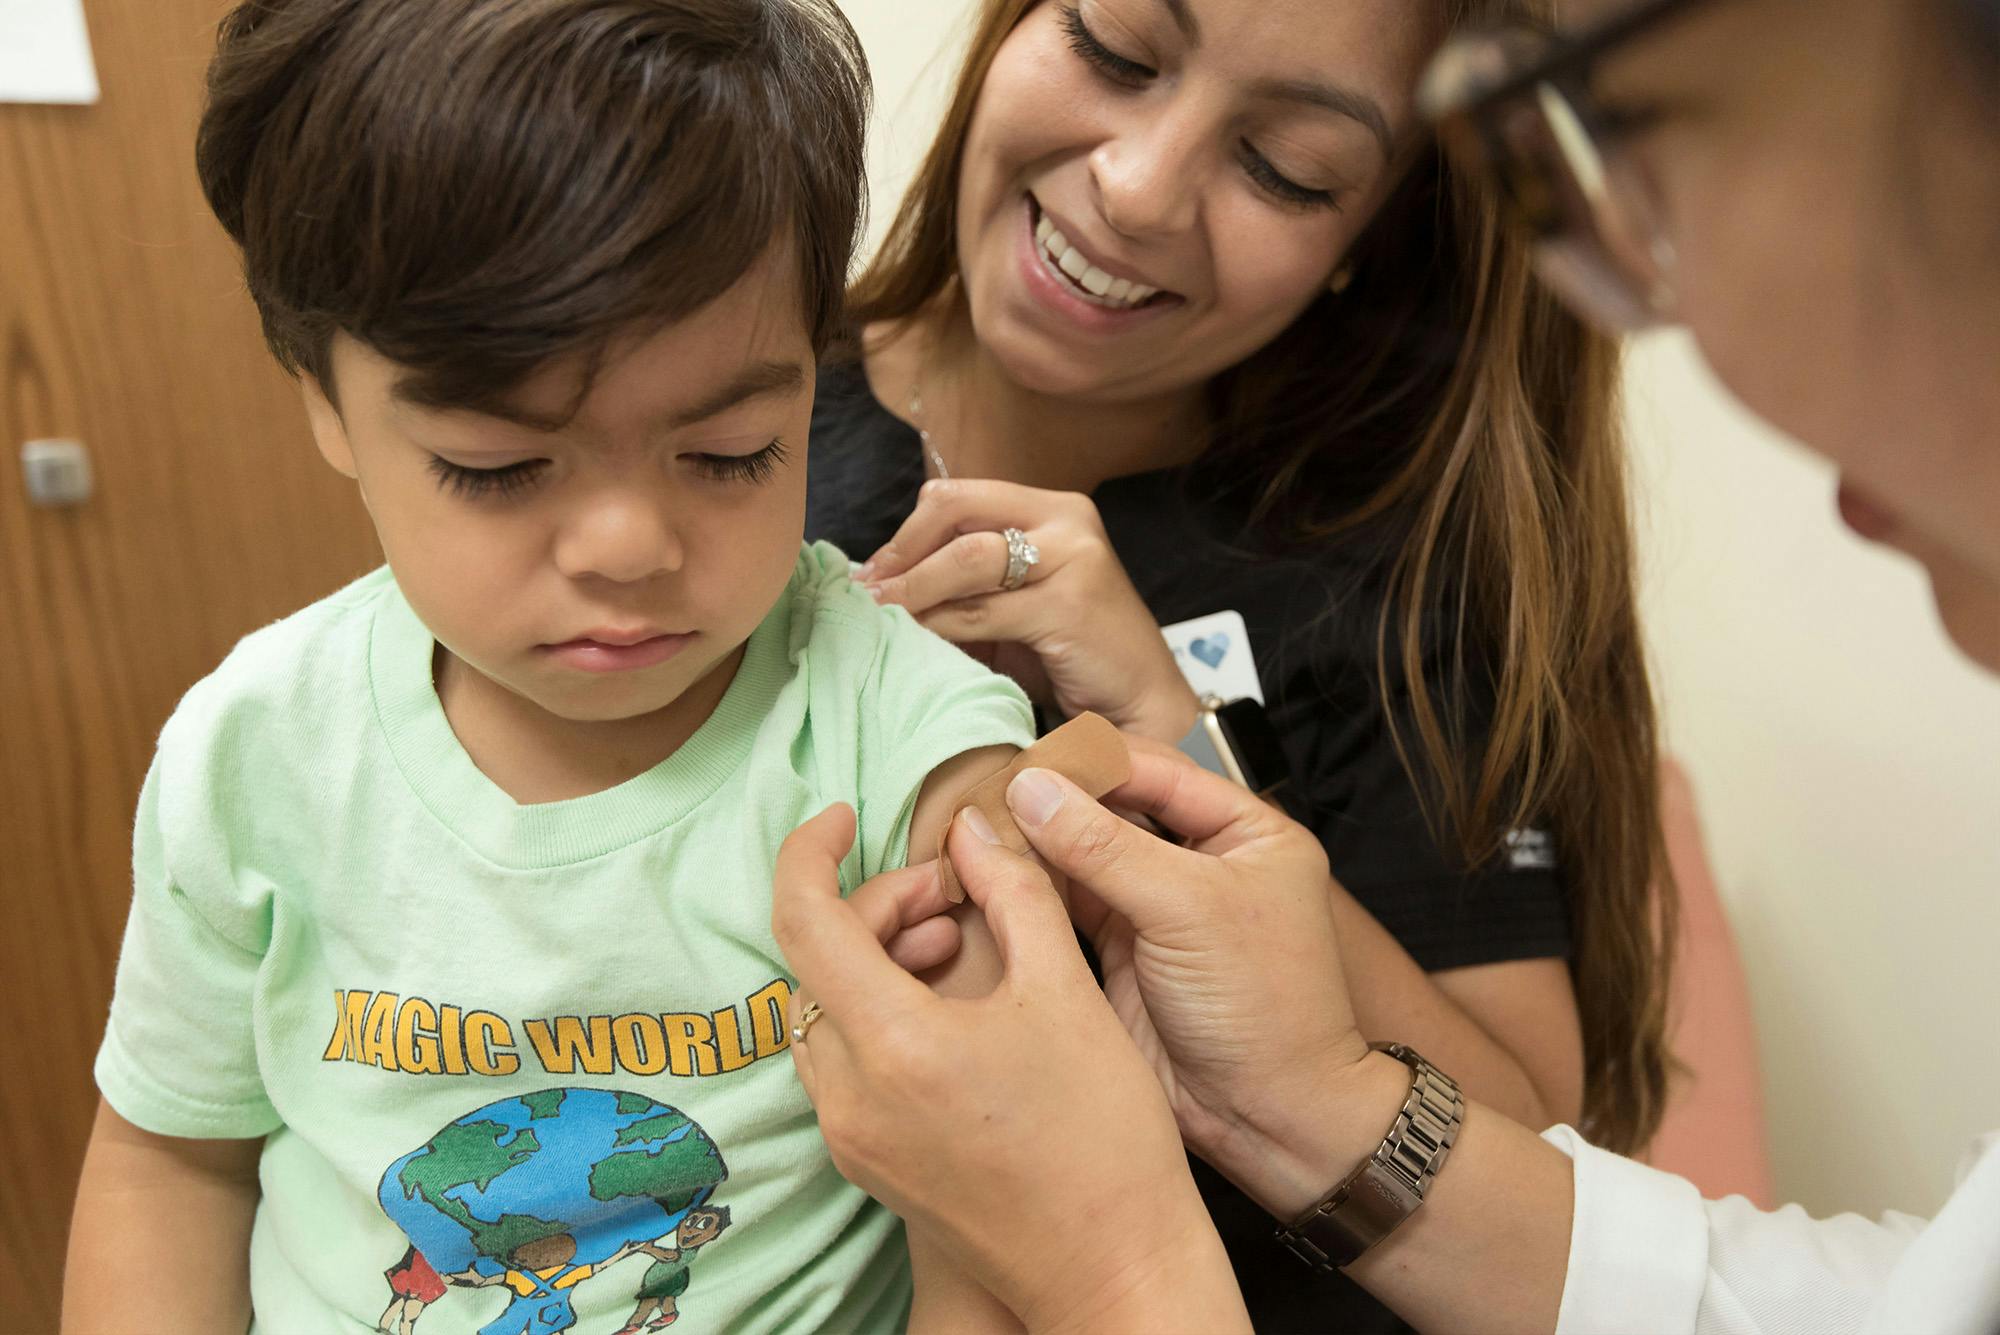 Child receiving vaccination or blood test